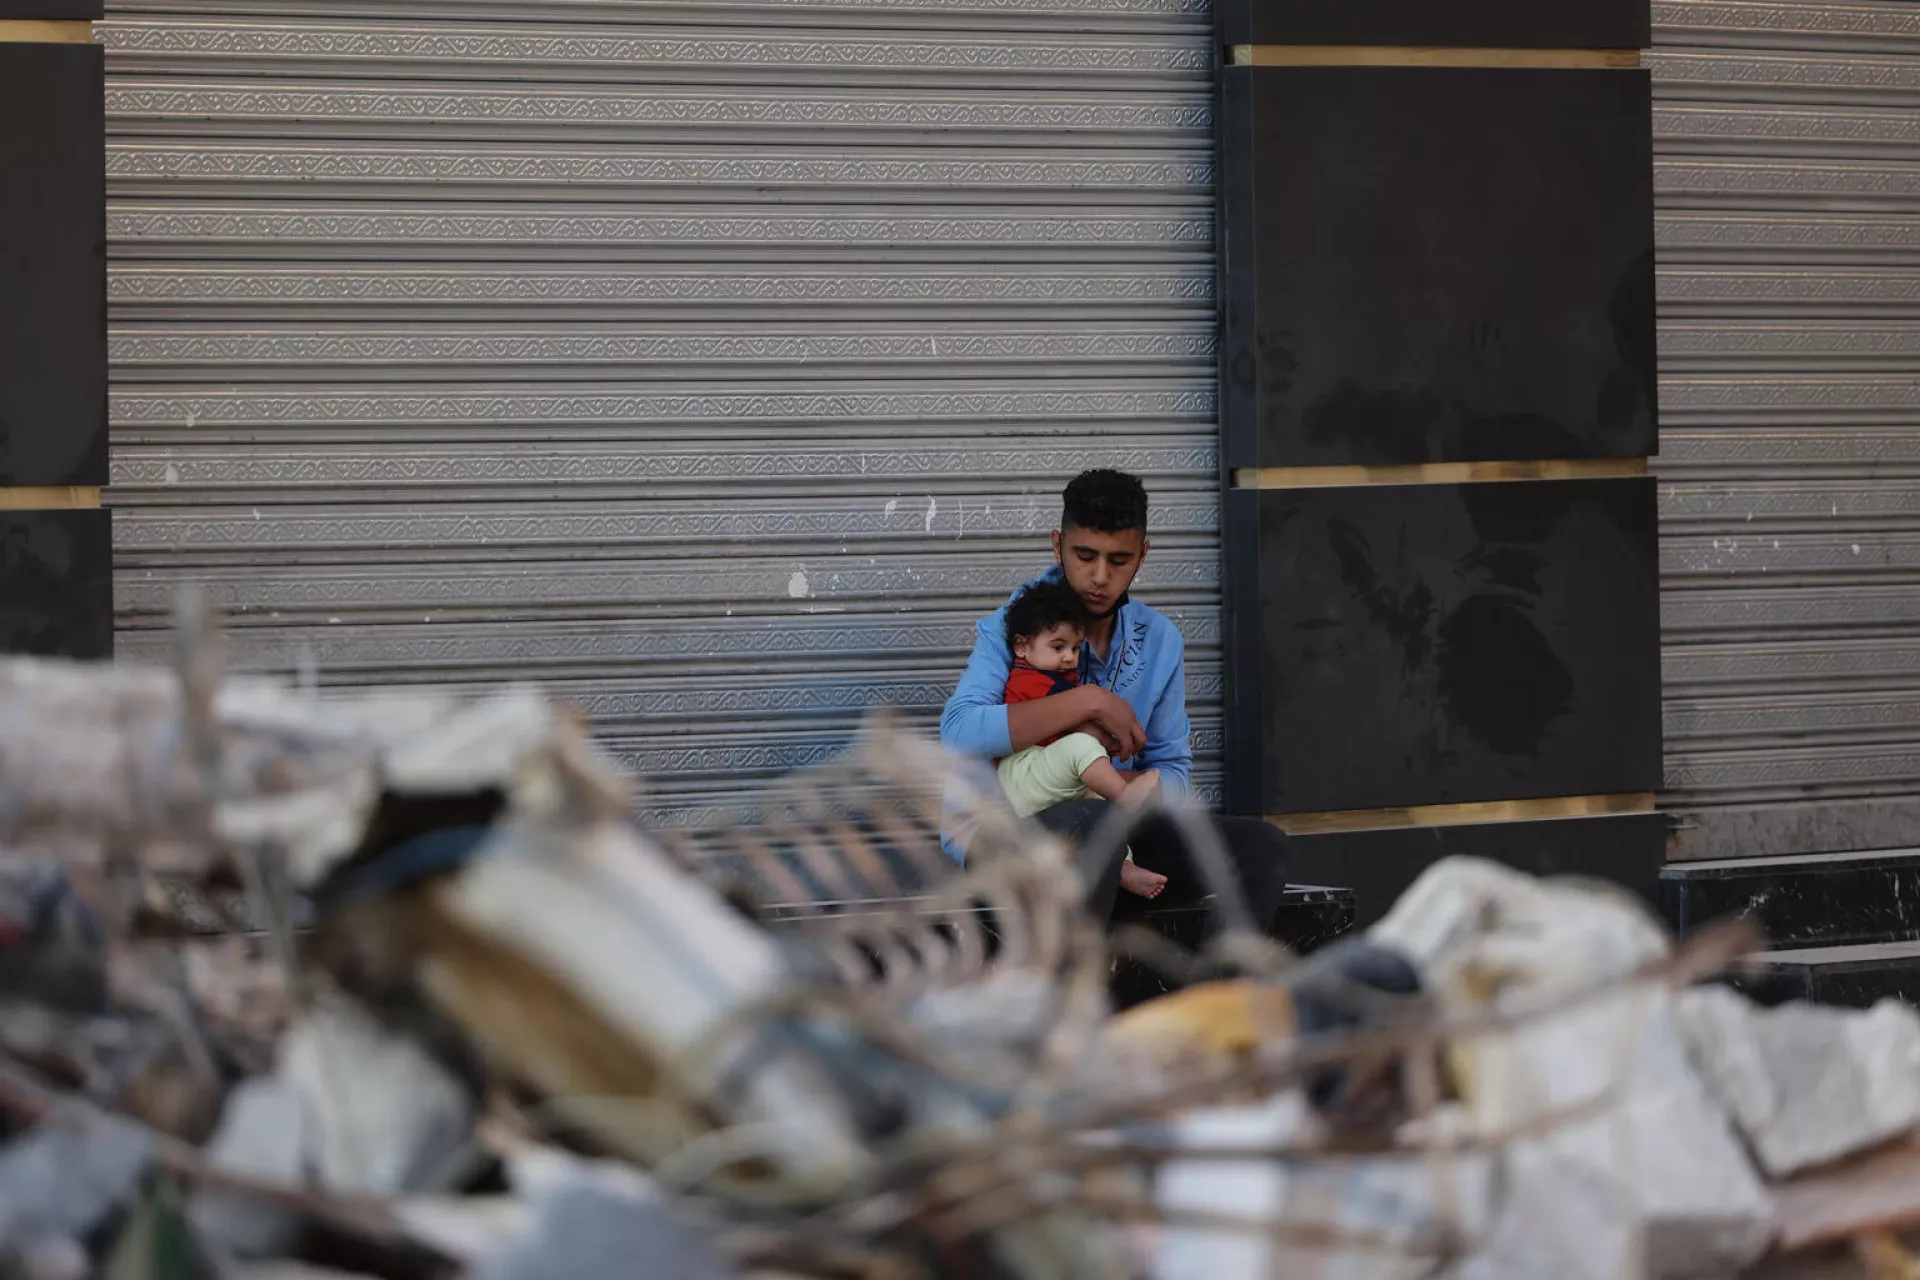 On 16 May 2021, a Palestinian man holds his son as he sits outside a closed shop in front of his destroyed home in his neighbourhood in Gaza City.